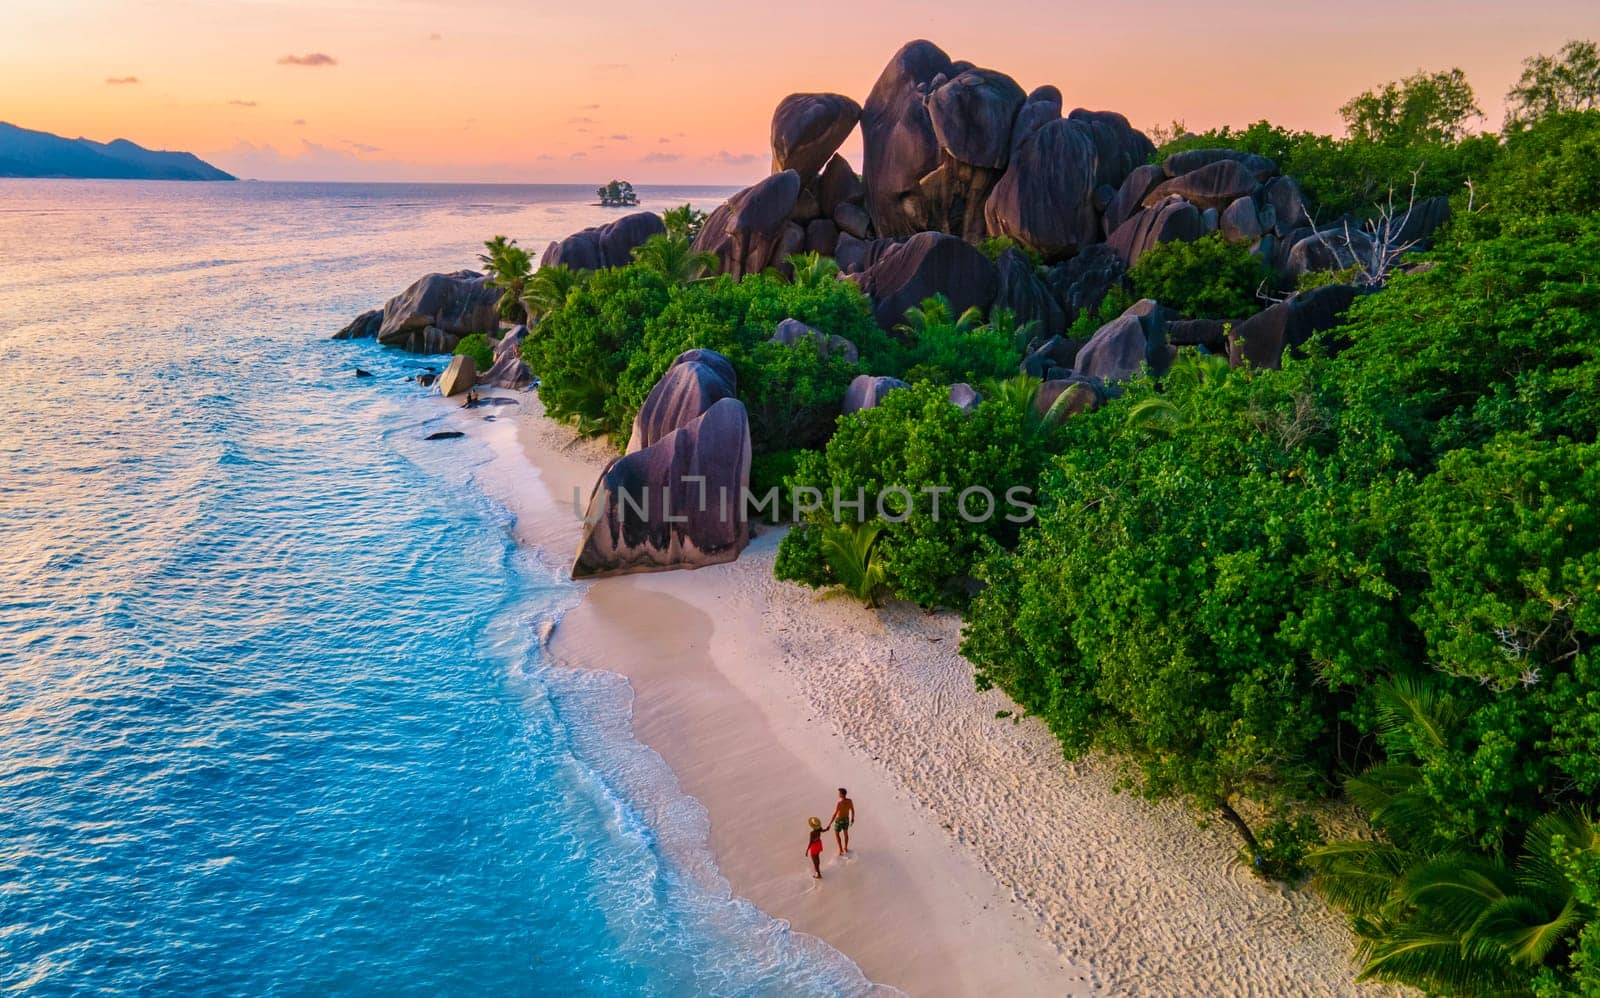 Anse Source d'Argent beach, La Digue Island, Seychelles, aerial view of La Digue Seychelles a tropical Island, couple men and woman walking at the beach during sunset at a luxury vacation